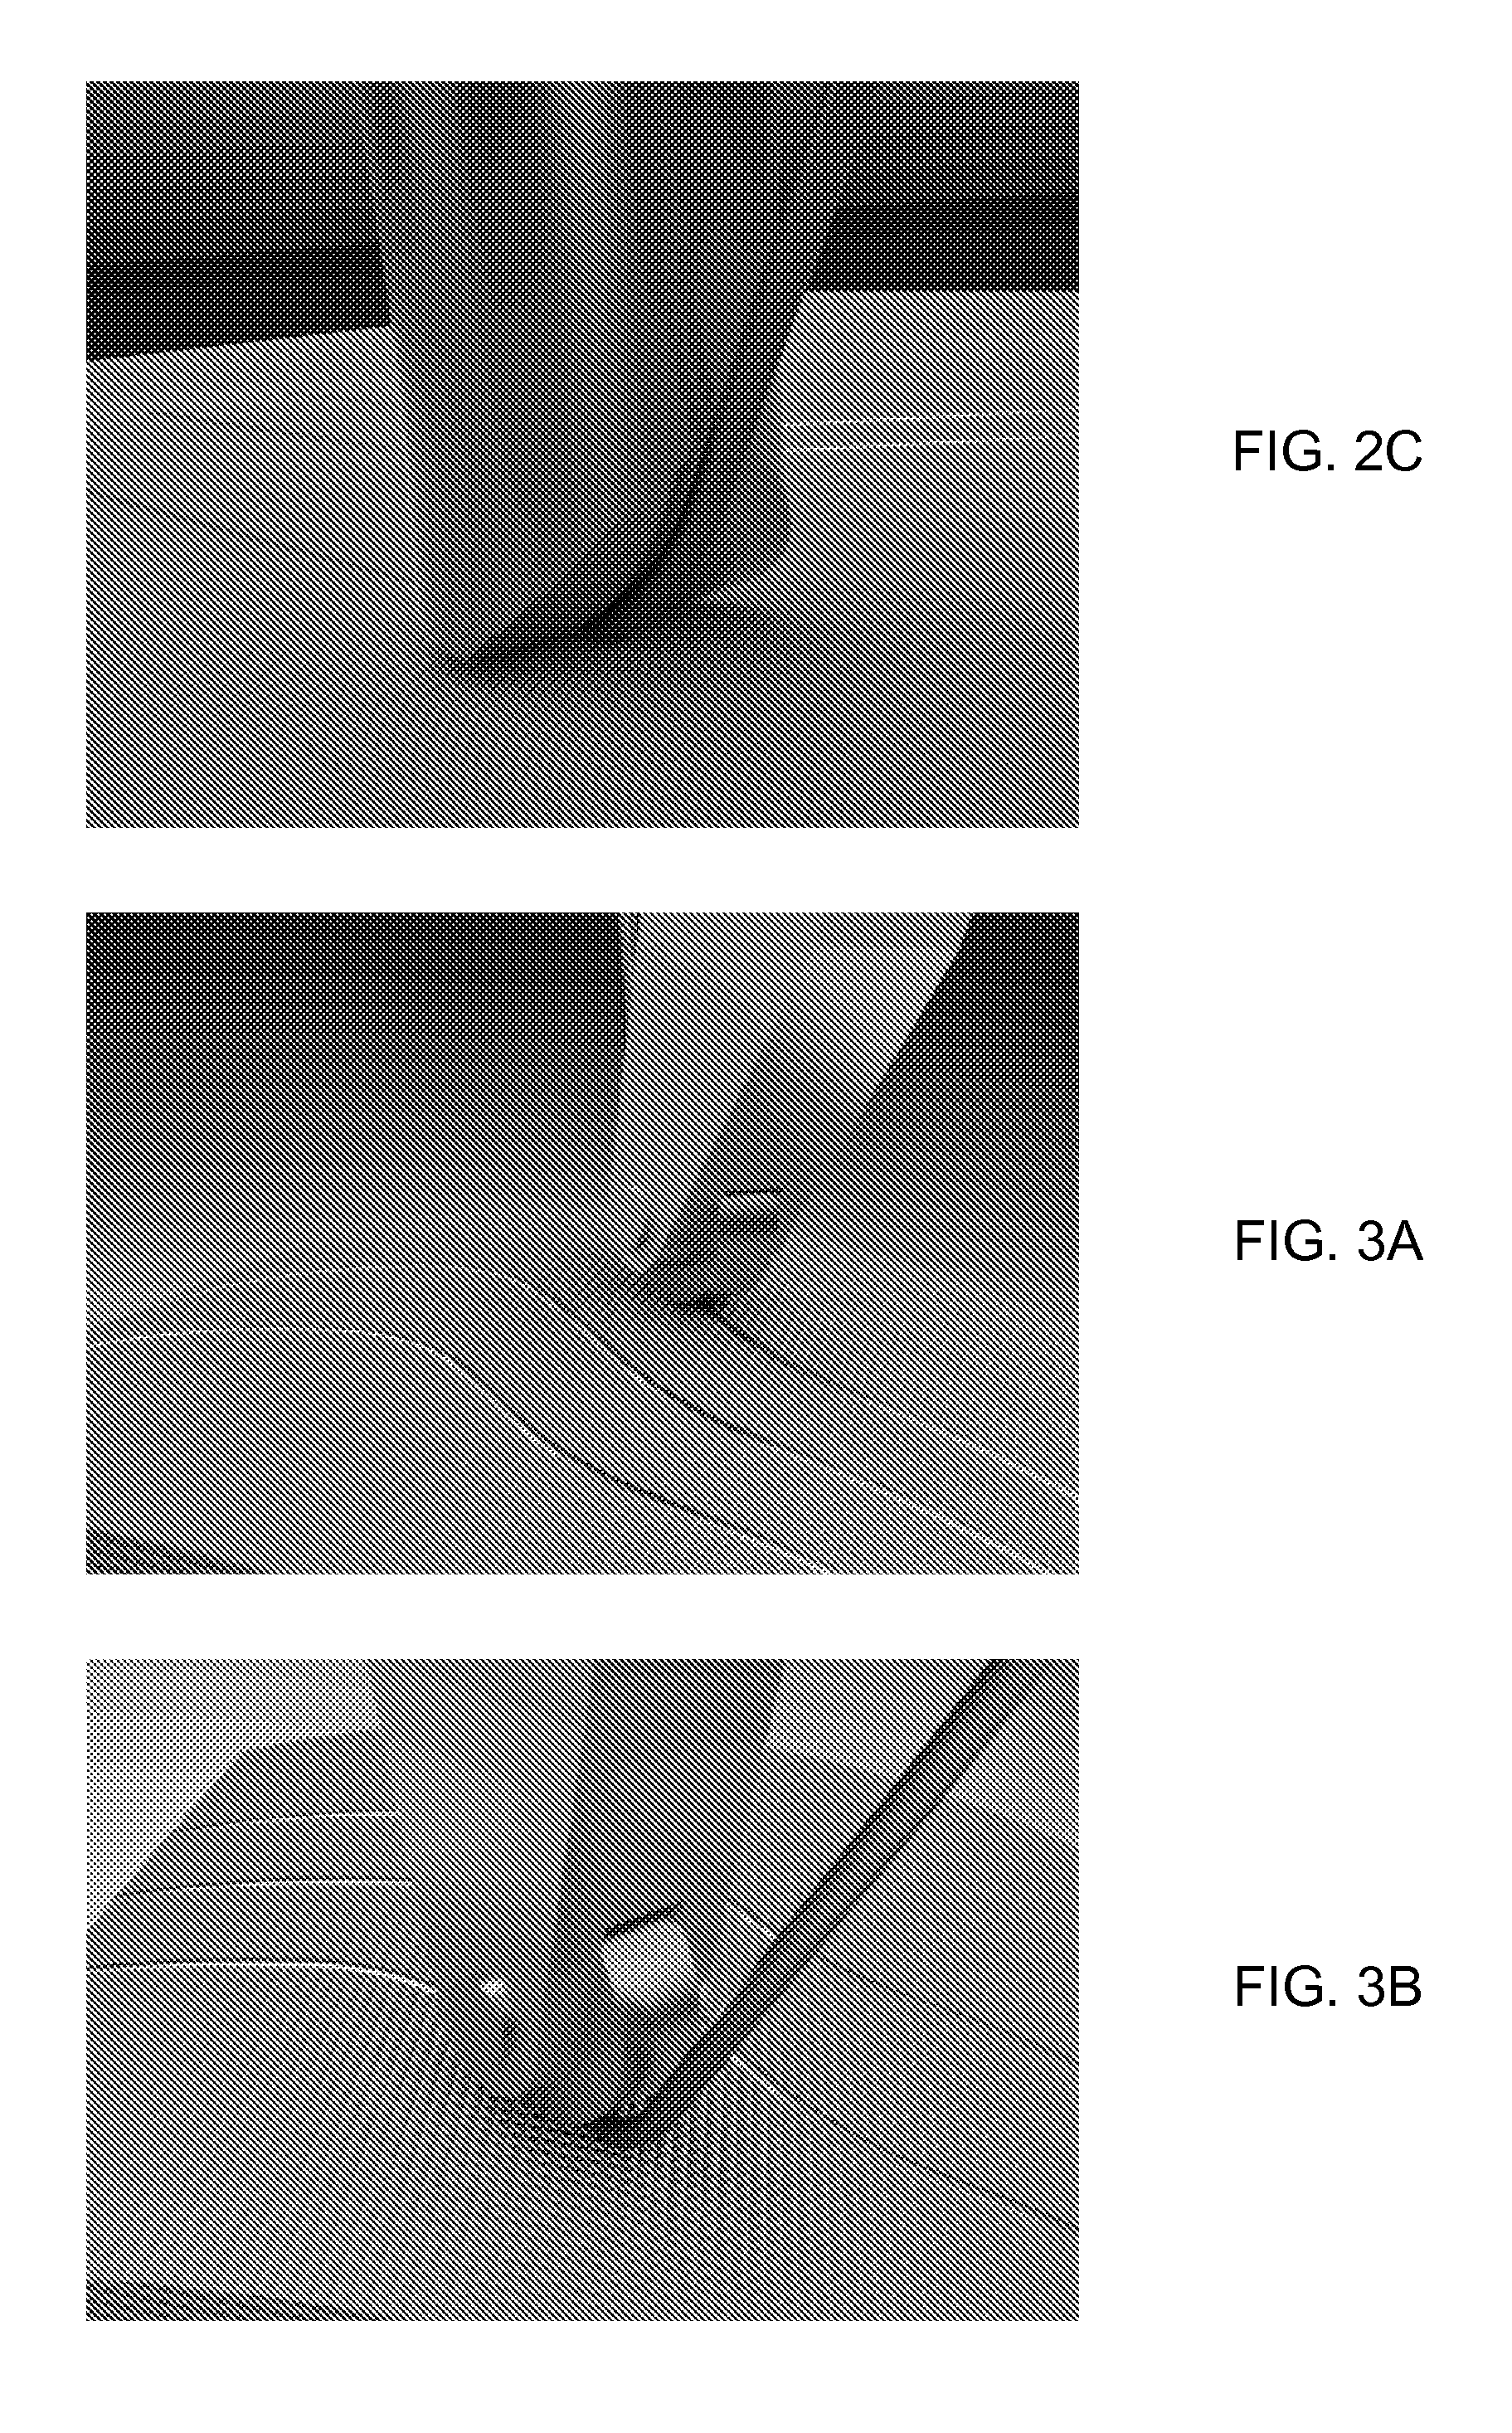 Methods and Systems For Connecting Inter-Layer Conductors and Components in 3D Structures, Structural Components, and Structural Electronic, Electromagnetic and Electromechanical Components/Devices